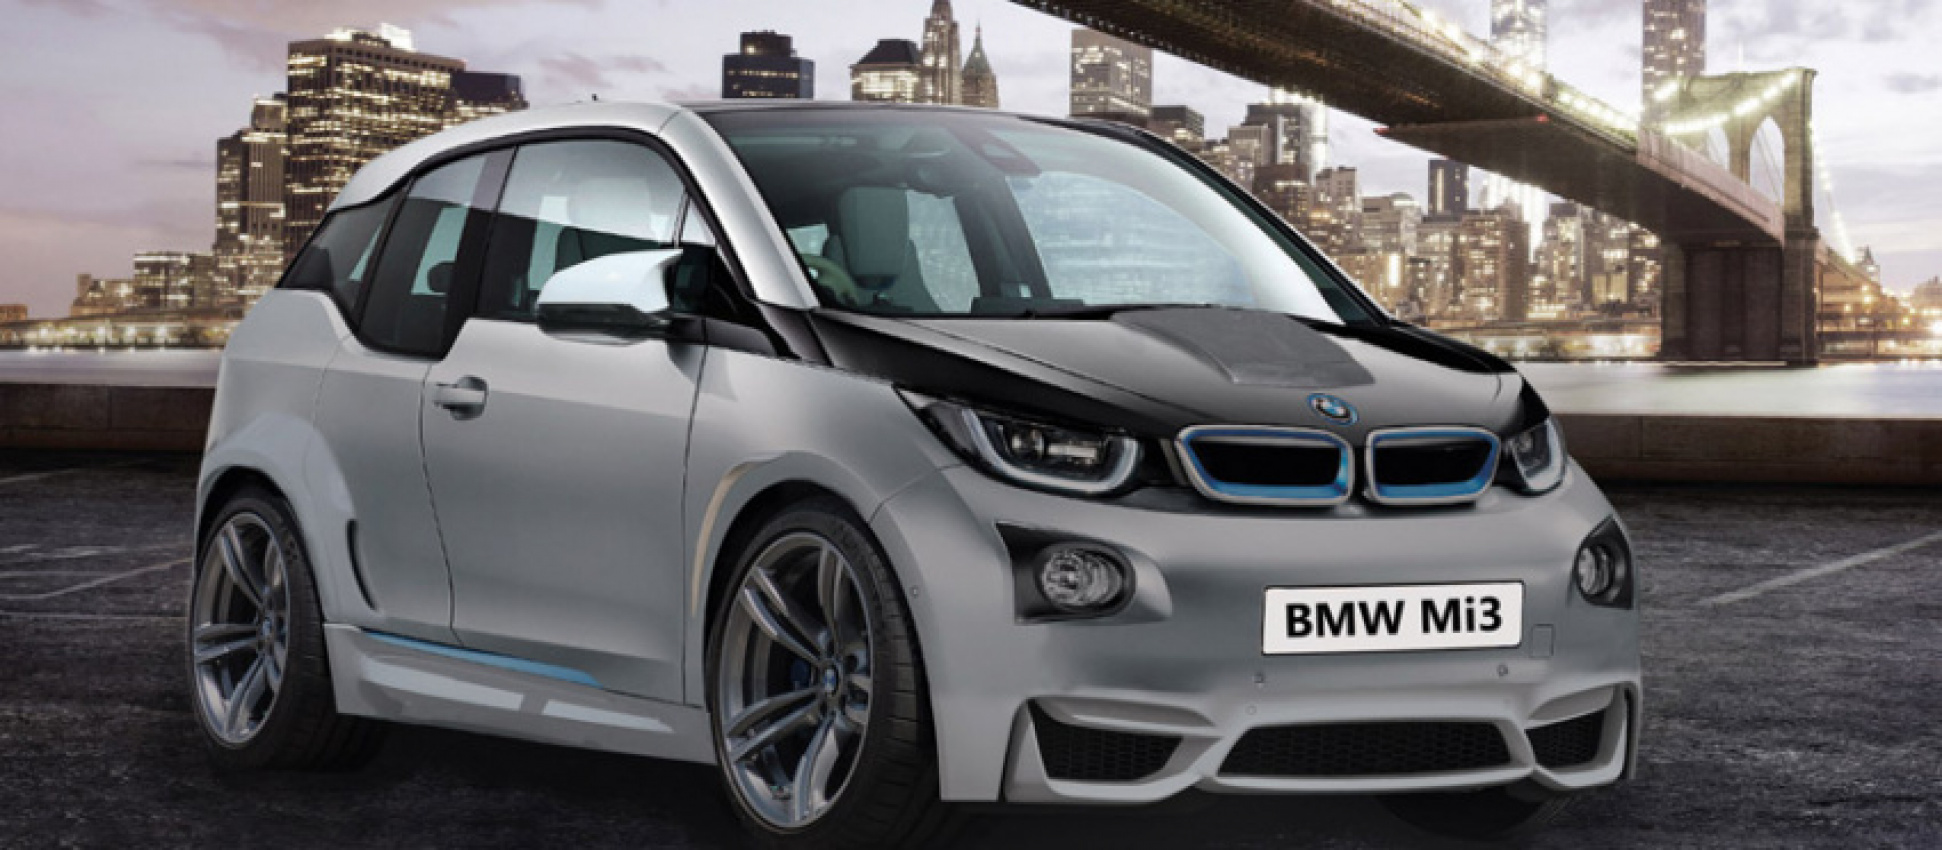 autos, bmw, cars, ford, honda, volkswagen, honda jazz, honda jazz type r, ford ka st, volkswagen up! gti and the bmw m i3 are the craziest vehicles you’ll see this weekend!